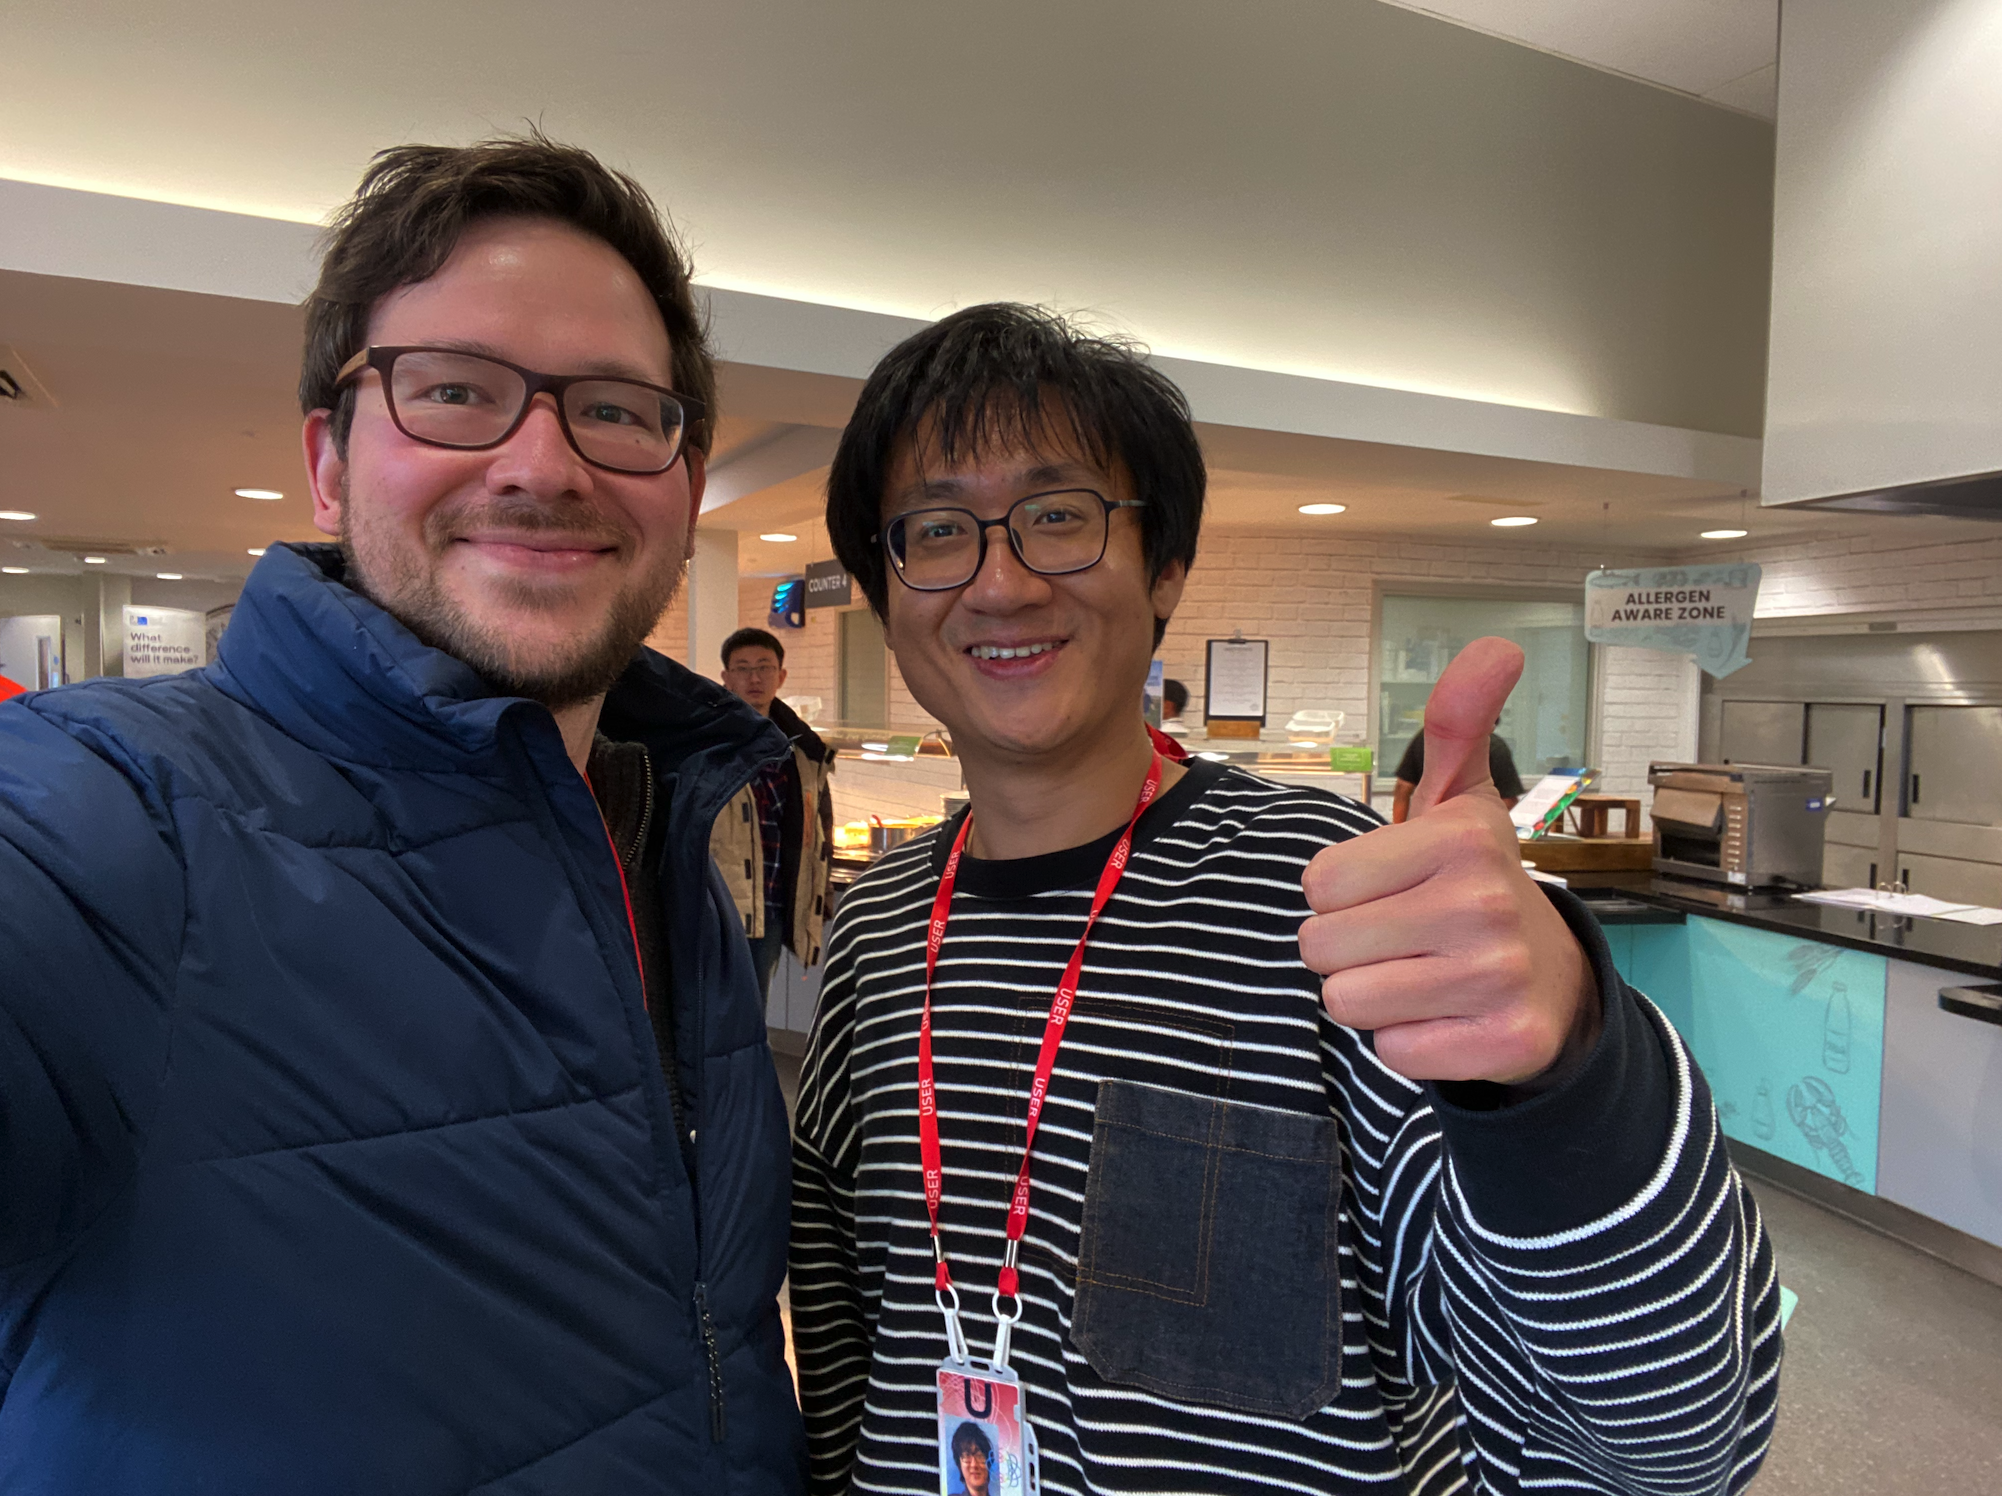  Now that Covid-19 restrictions have abated, the canteen of the Rutherford Appleton Laboratory has again become a place where you run into old friends and collaborators, like  Prof. Shilei Zhang  from ShanghaiTech University. 